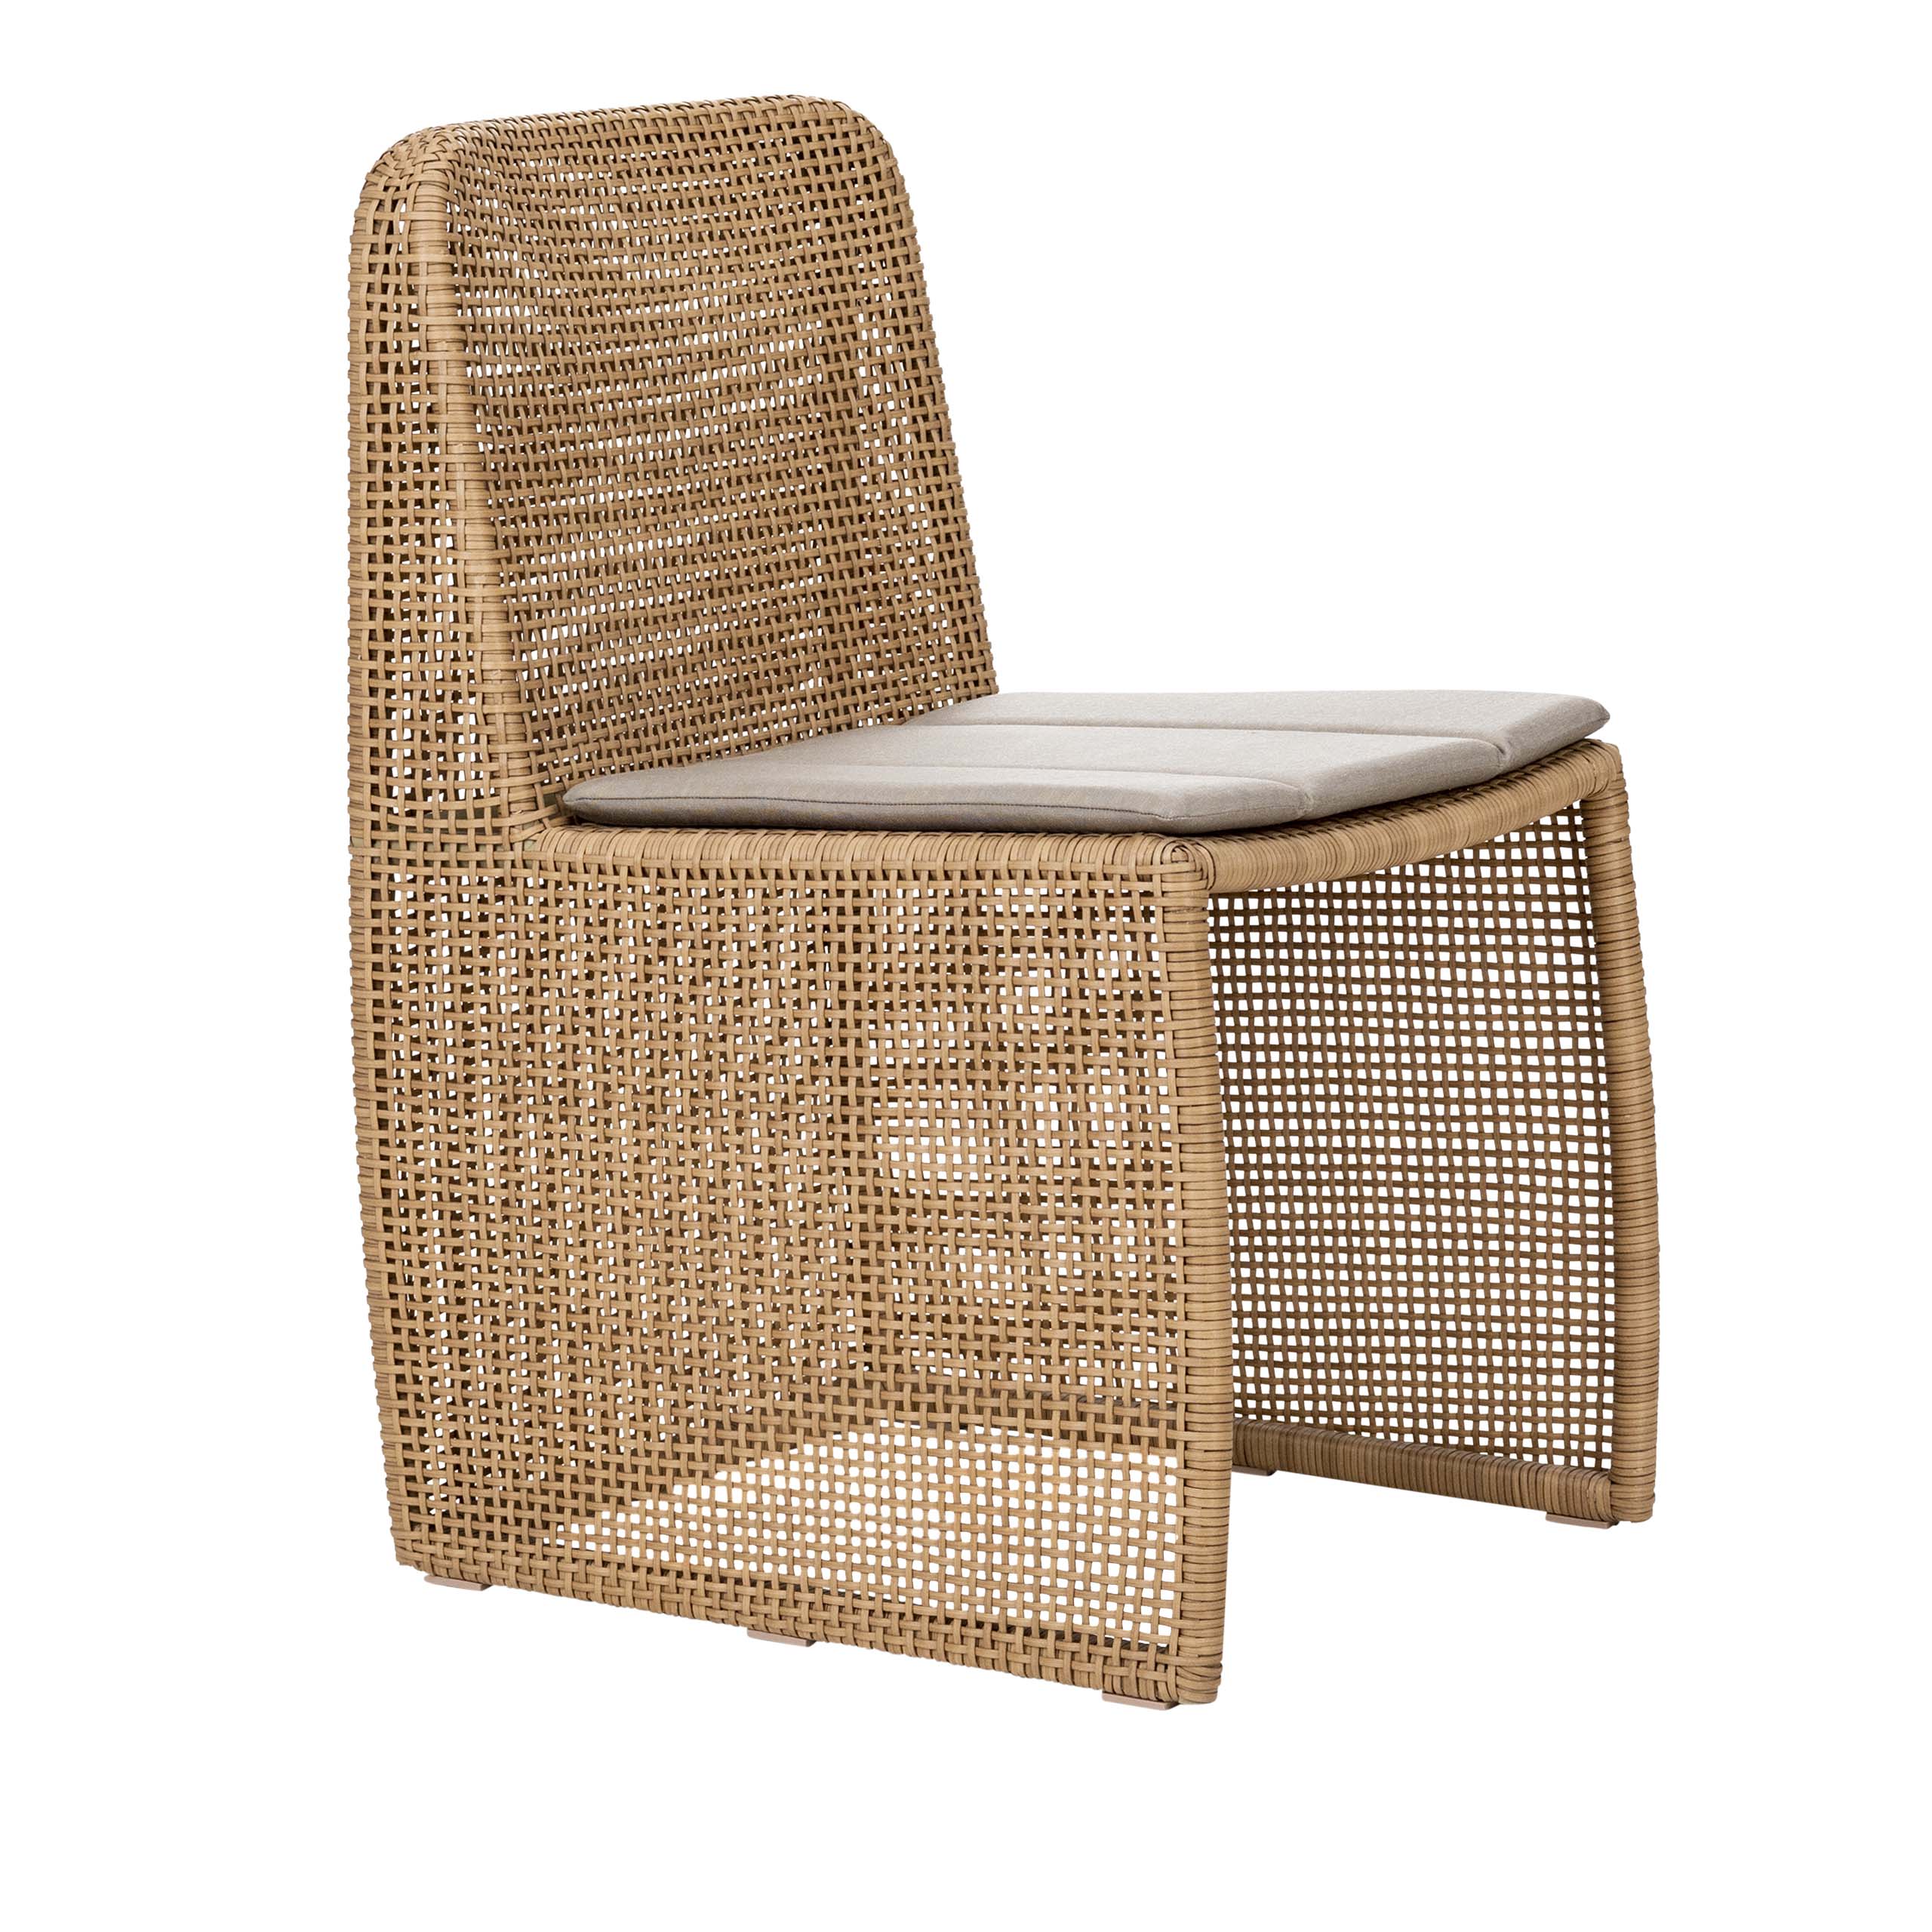 Design Warehouse - 128350 - Signature Outdoor Dining Side Chair (Natural)  - Natural